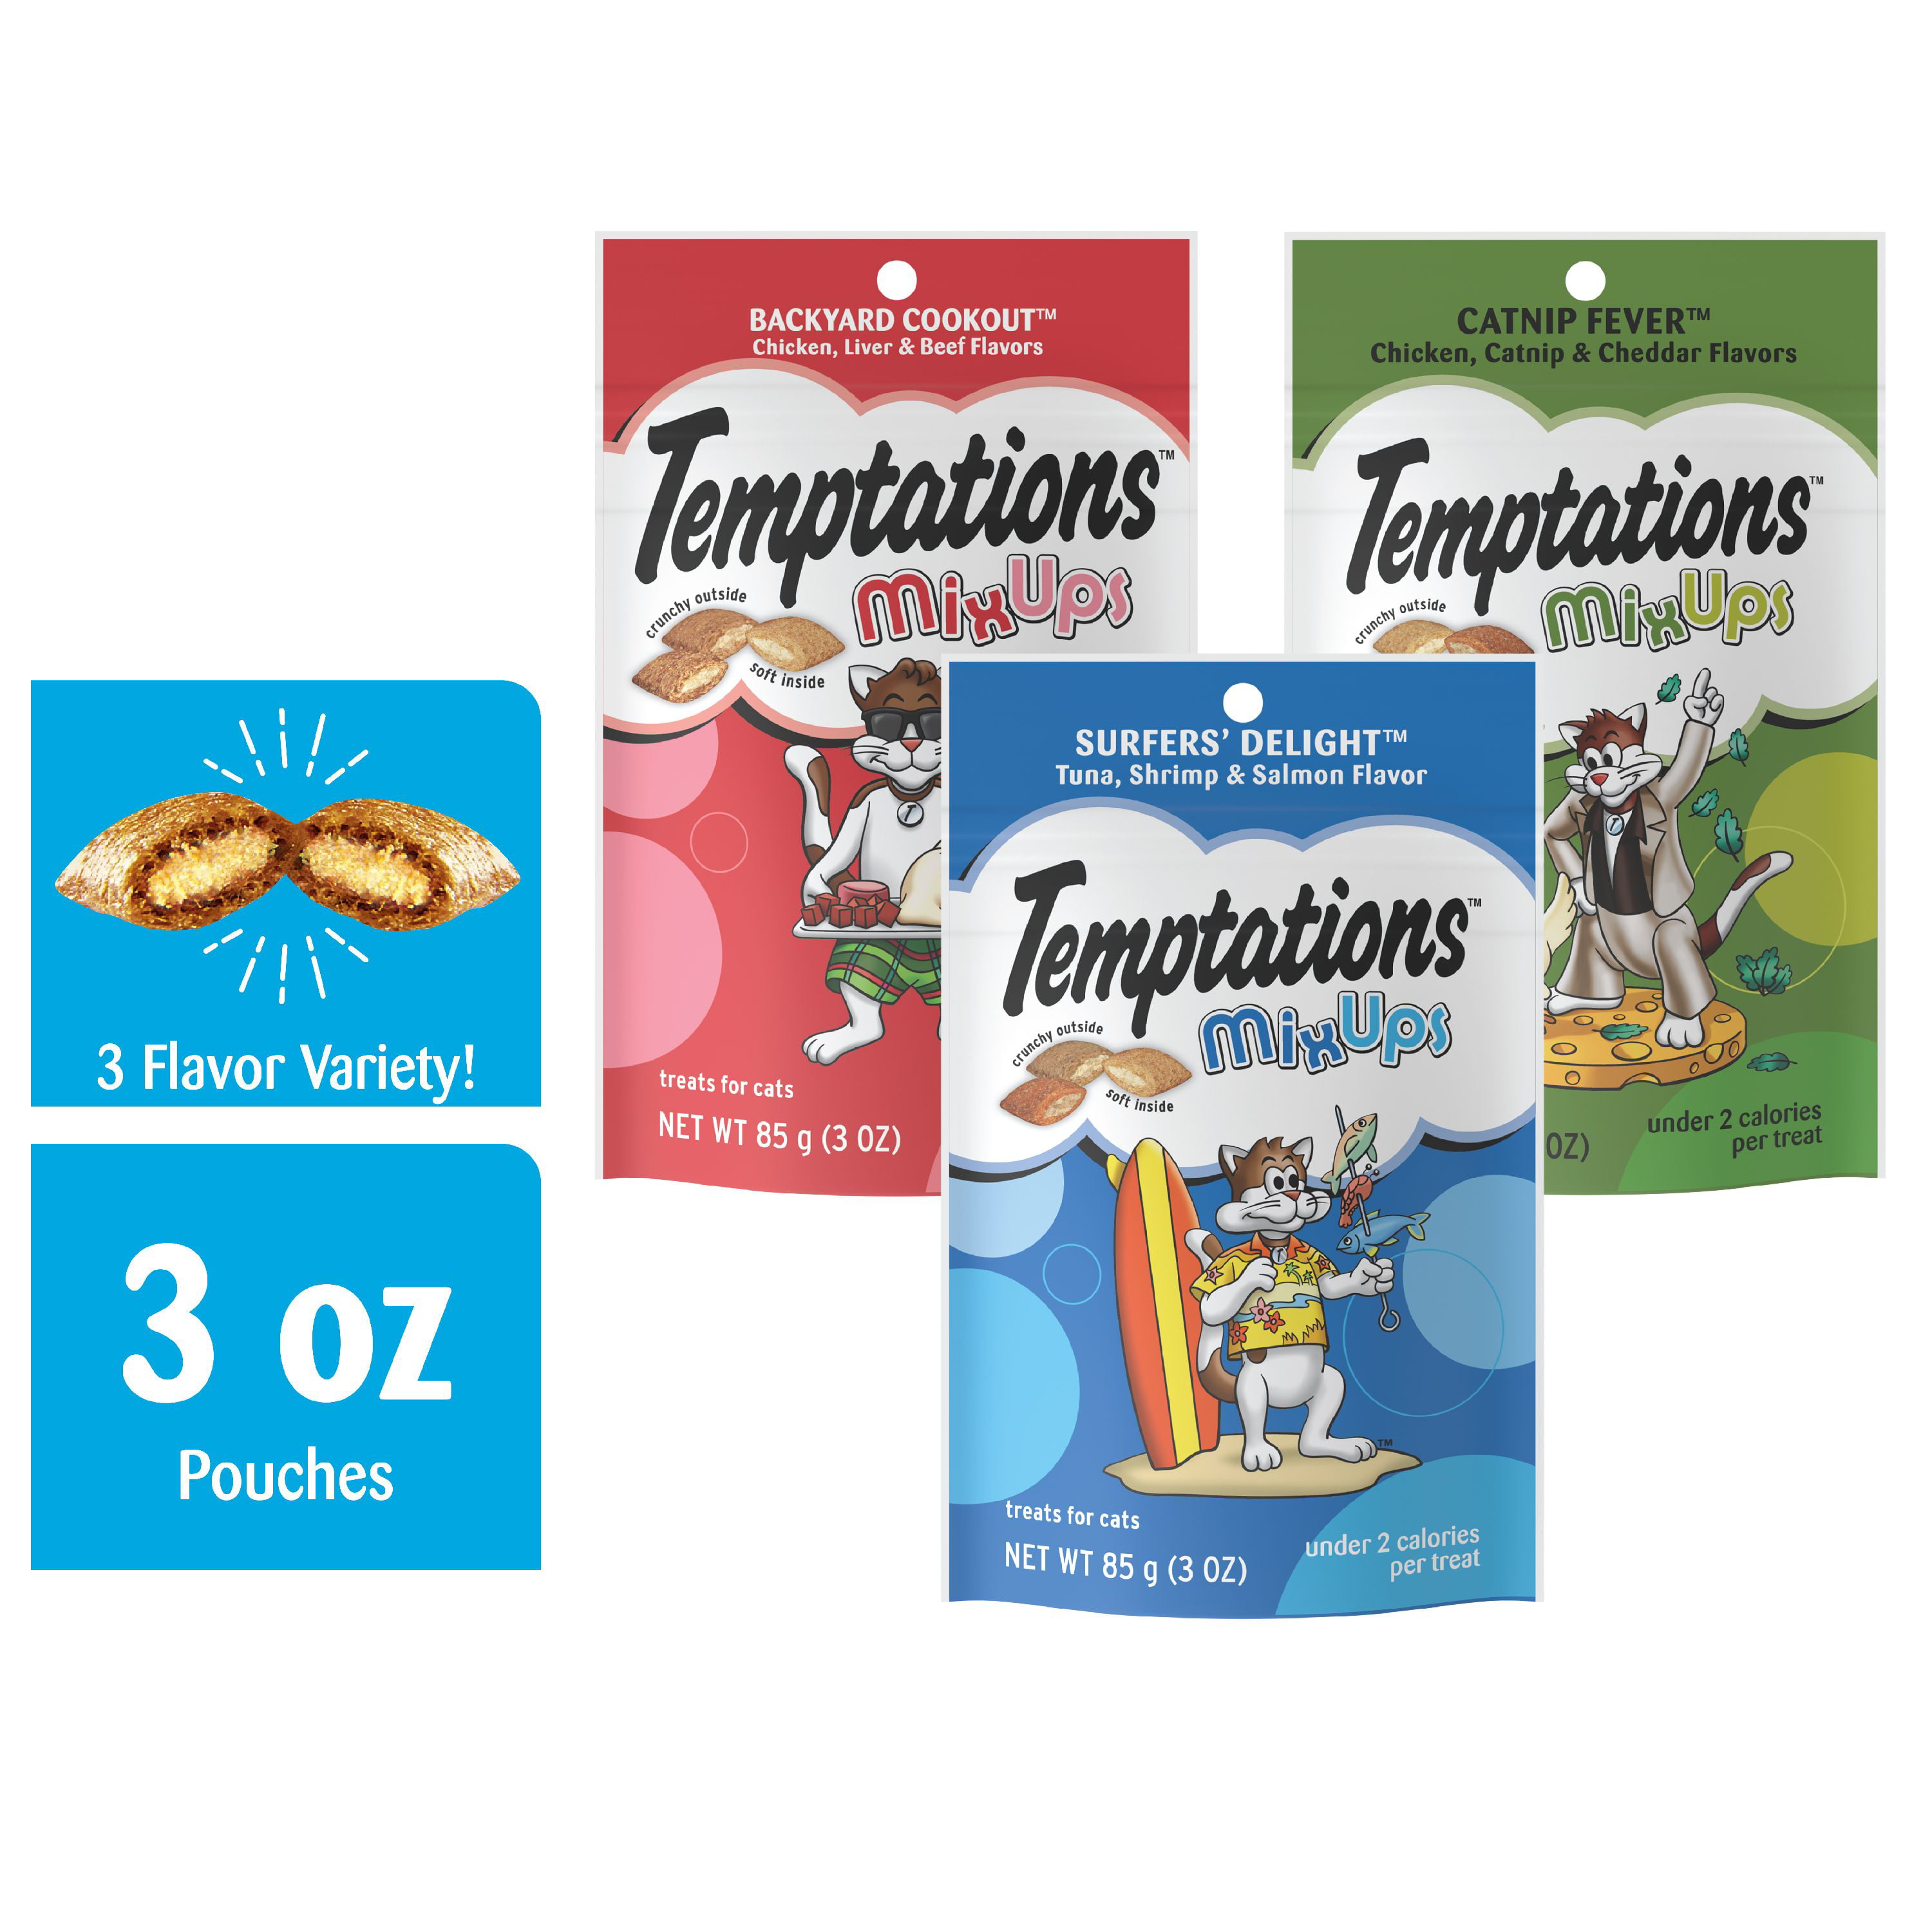 Temptations Mixups Crunchy And Soft Cat Treats Variety Pack In Backyard Cookout Surfers Delight And Catnip Fever Flavors 6 3 Oz Pouches